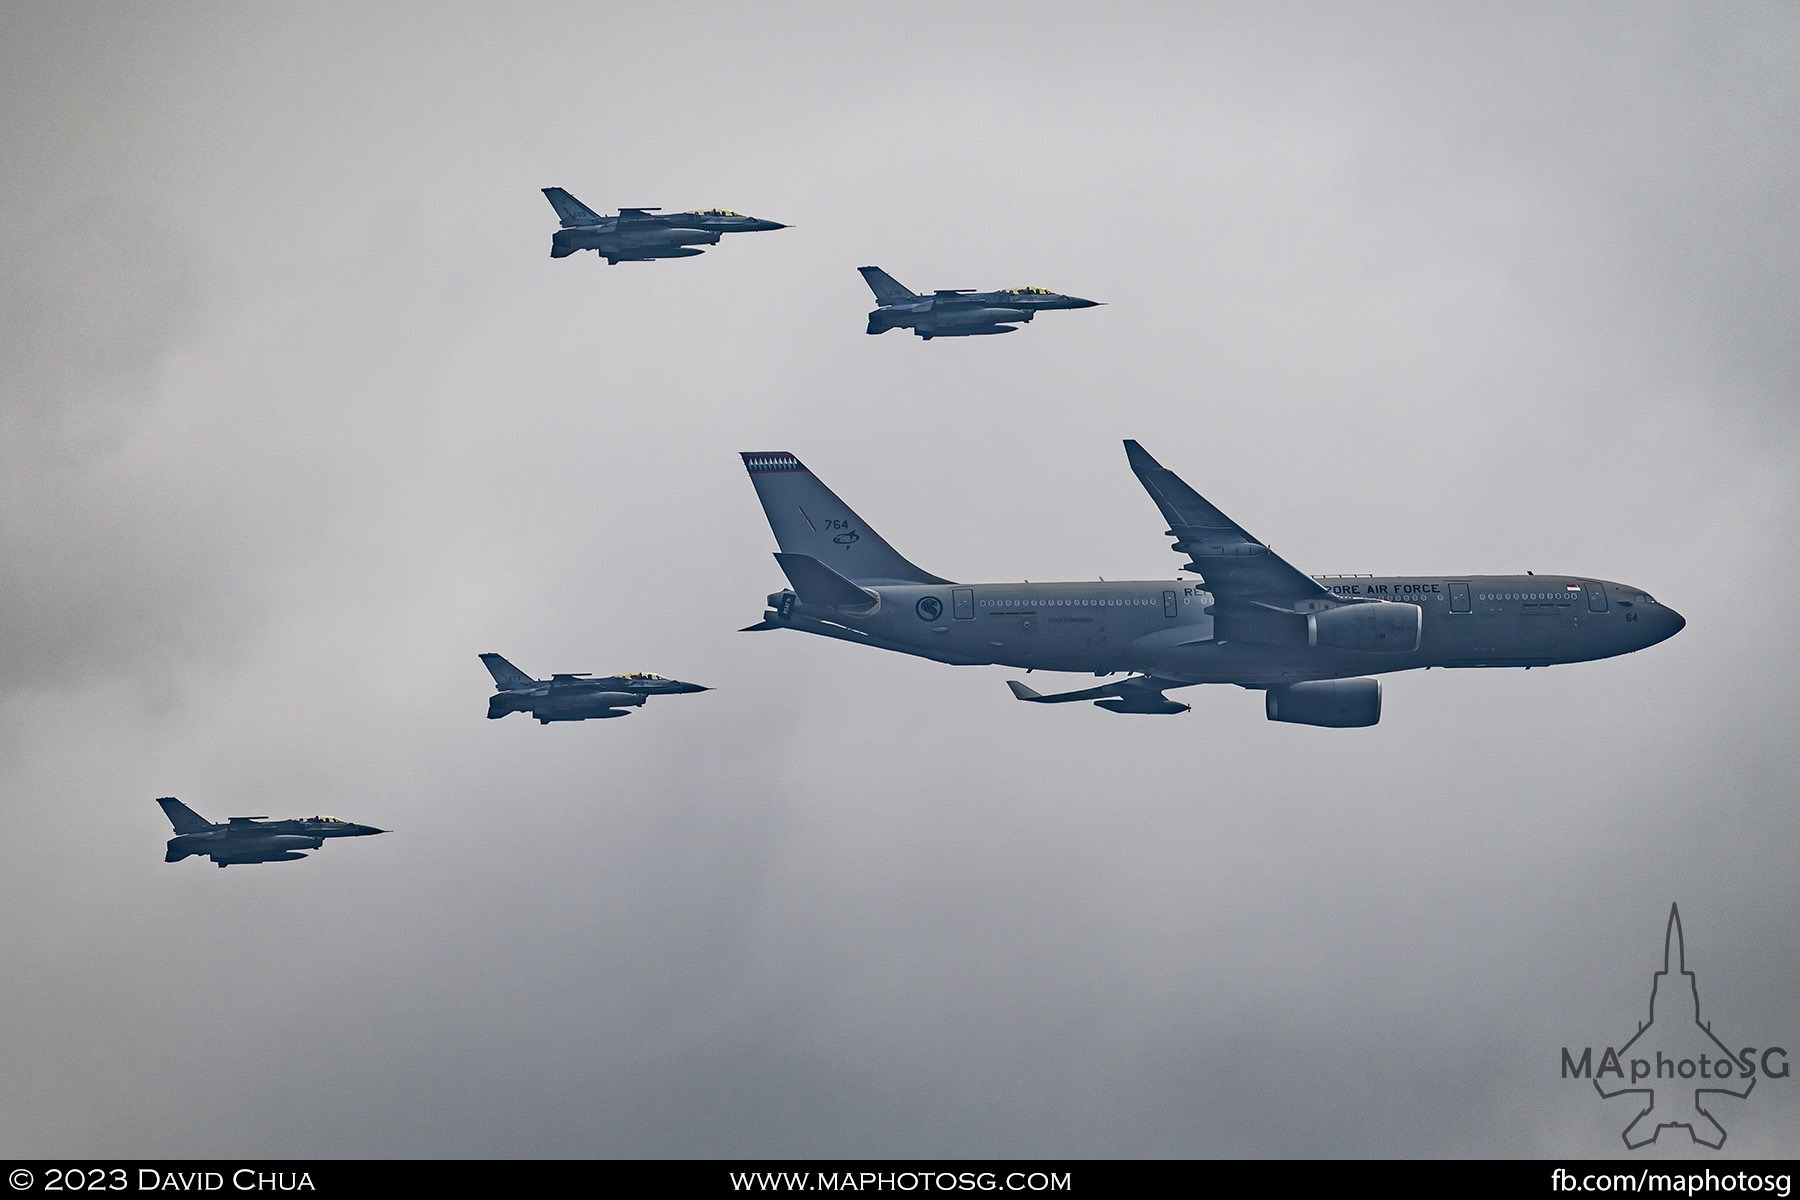 Formation of 4 F-16s and MRTT flypast